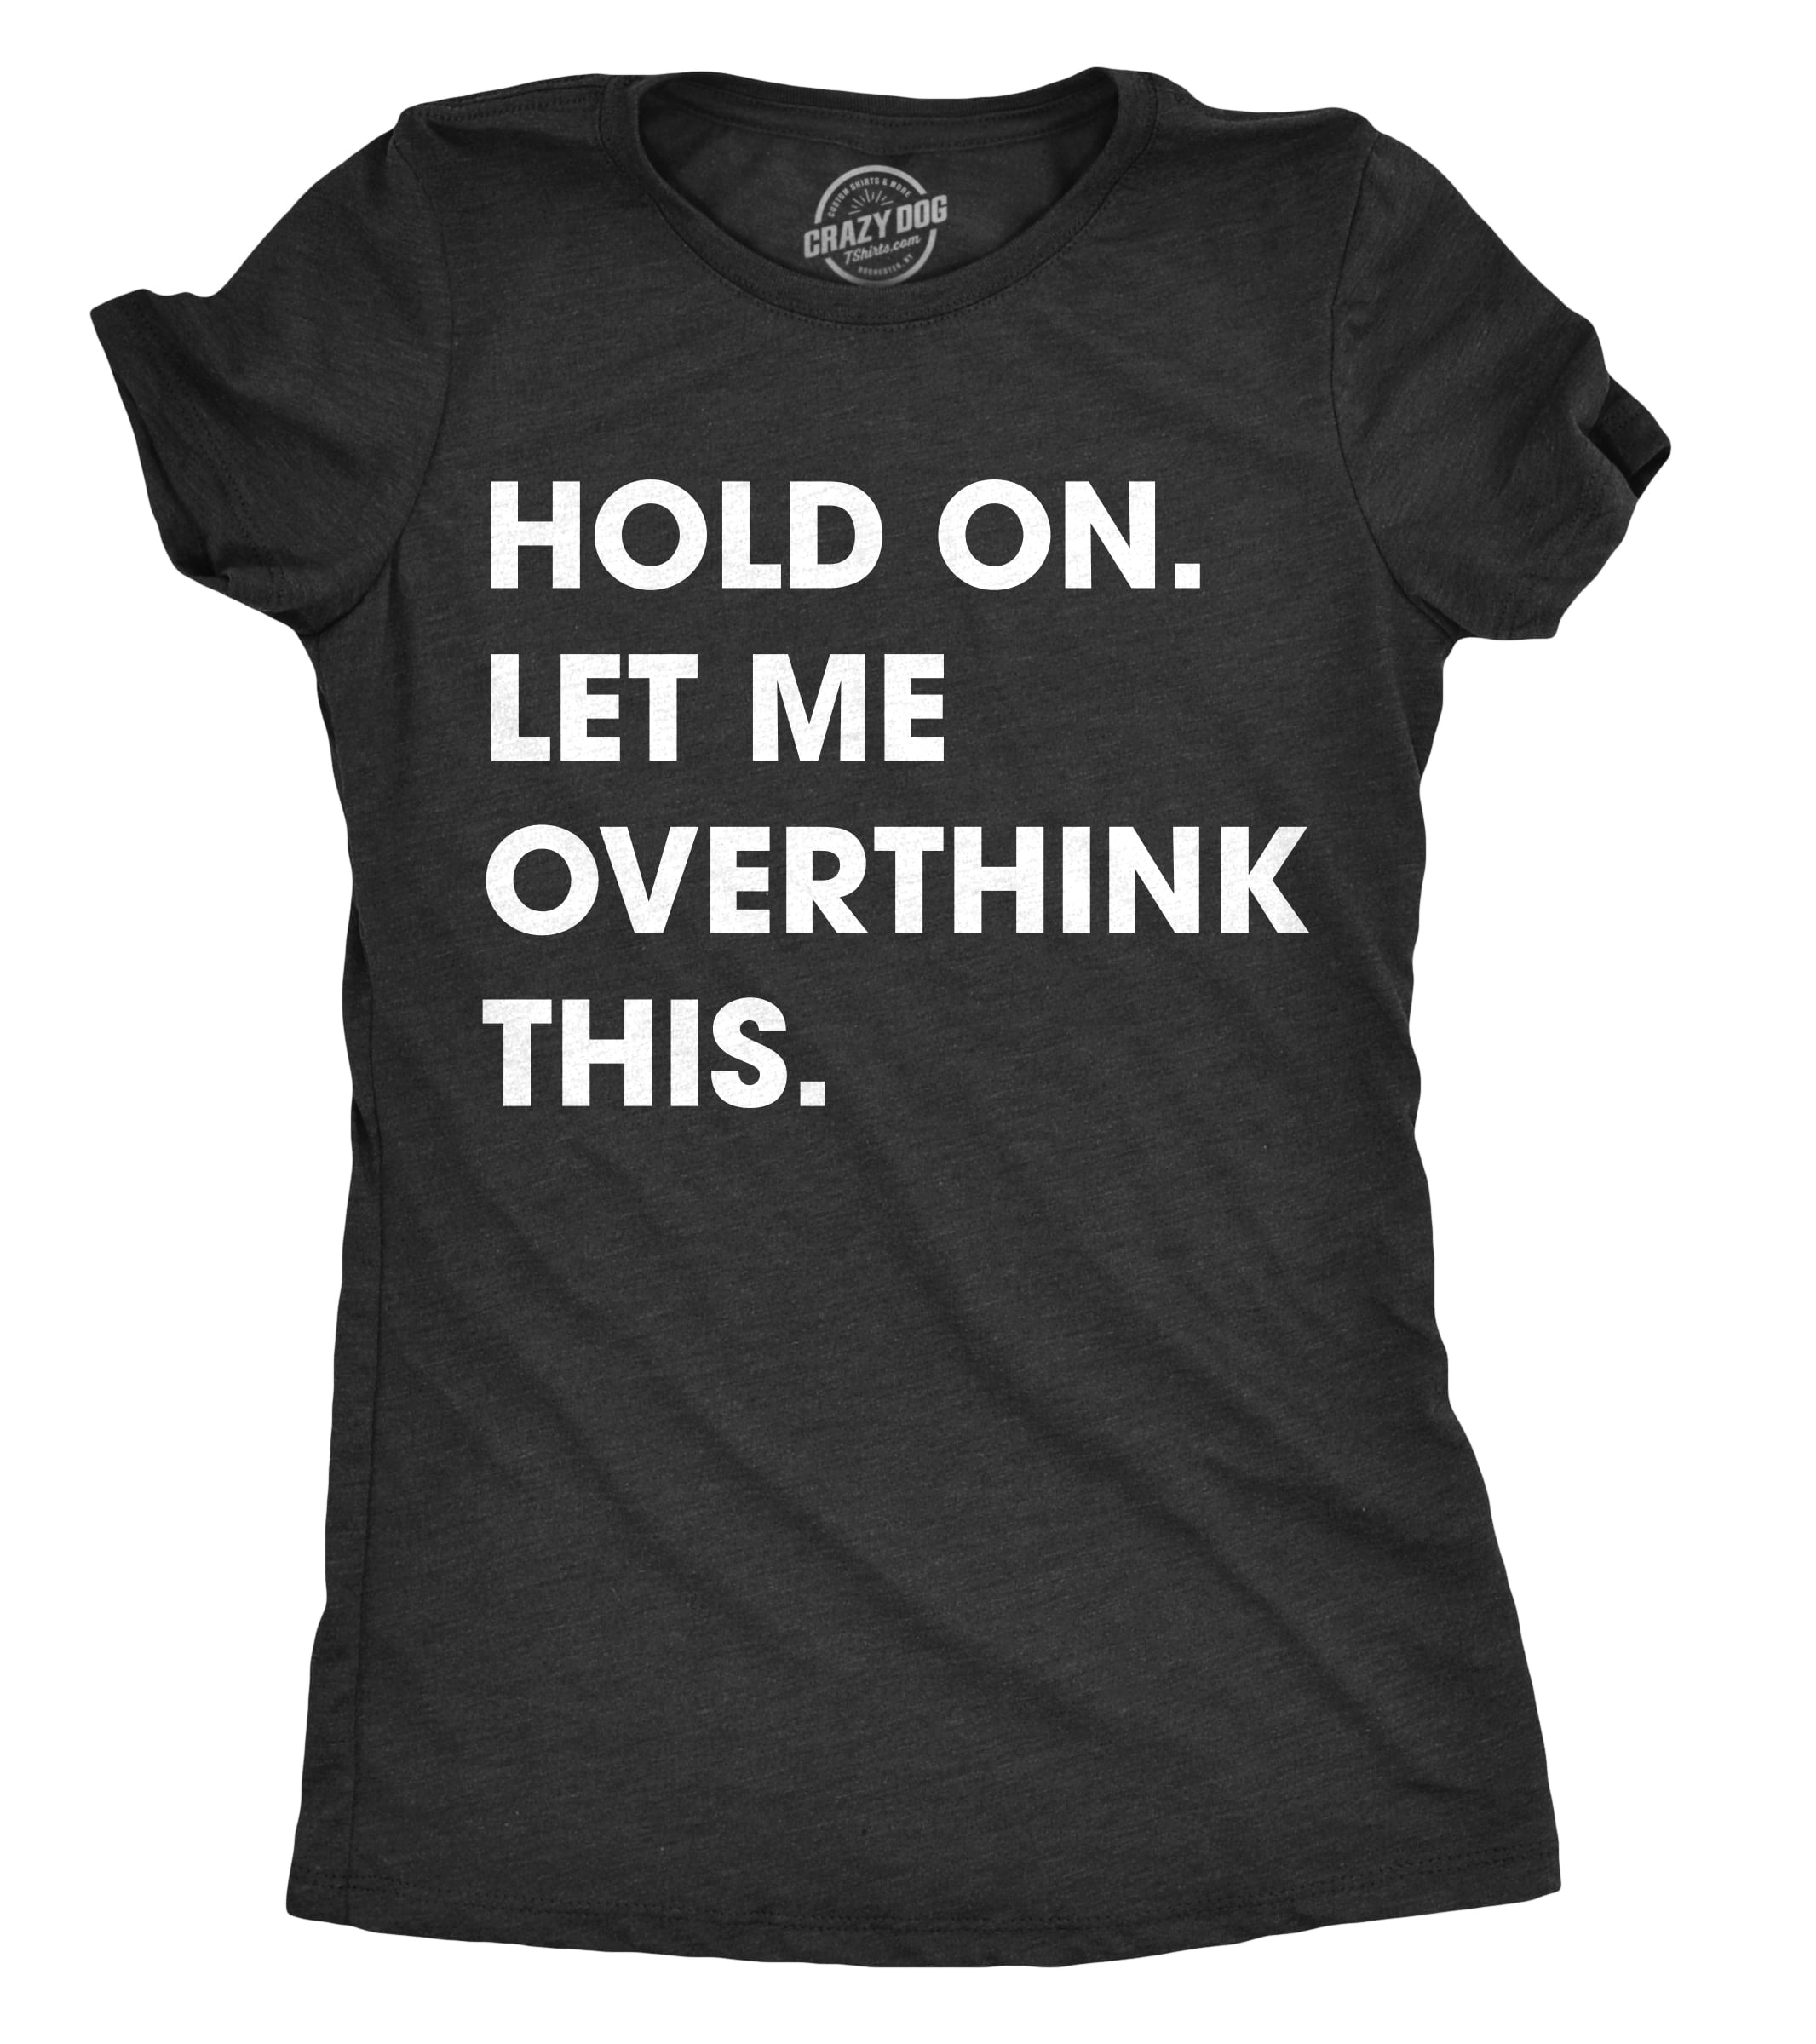 YNALIY Women Hold on Let Me Overthink This T-Shirt Funny Letter Printed Short Sleeve Crew Neck Tops Tees